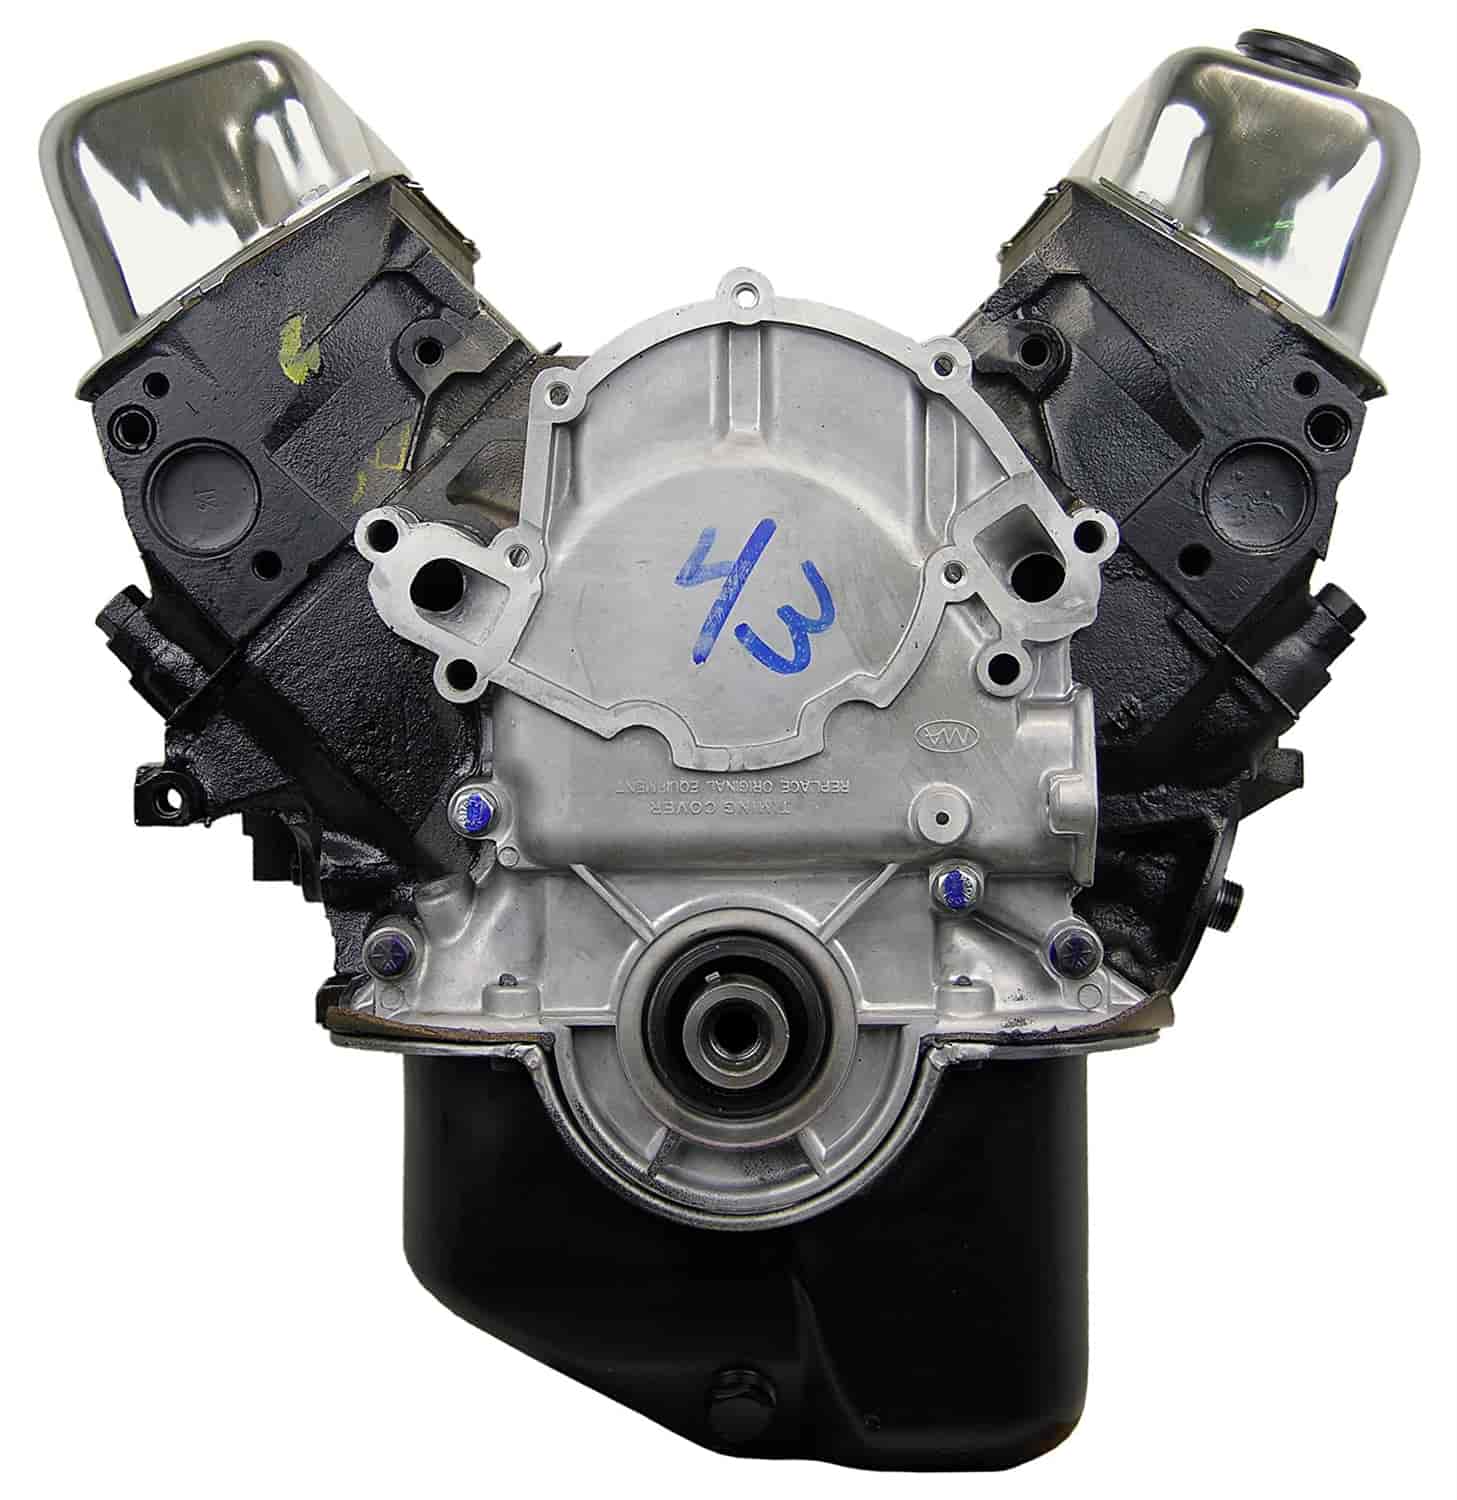 Remanufactured Crate Engine for 1980-1983 Ford/Mercury Car with 302ci/5.0L V8